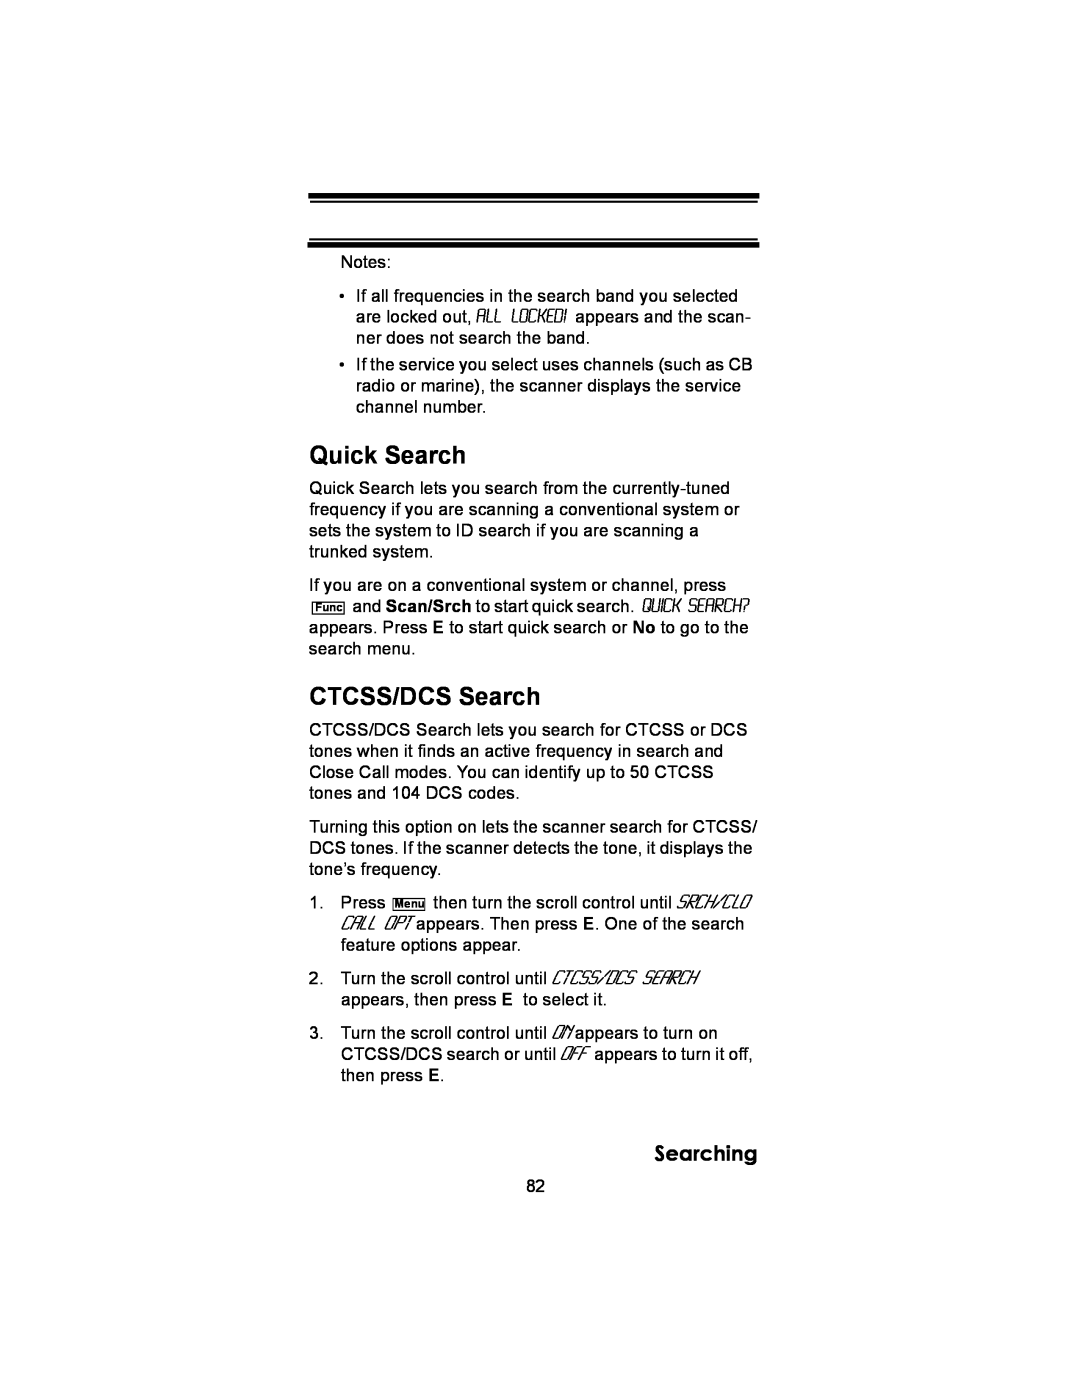 Uniden BC246T owner manual Quick Search, CTCSS/DCS Search, Searching 